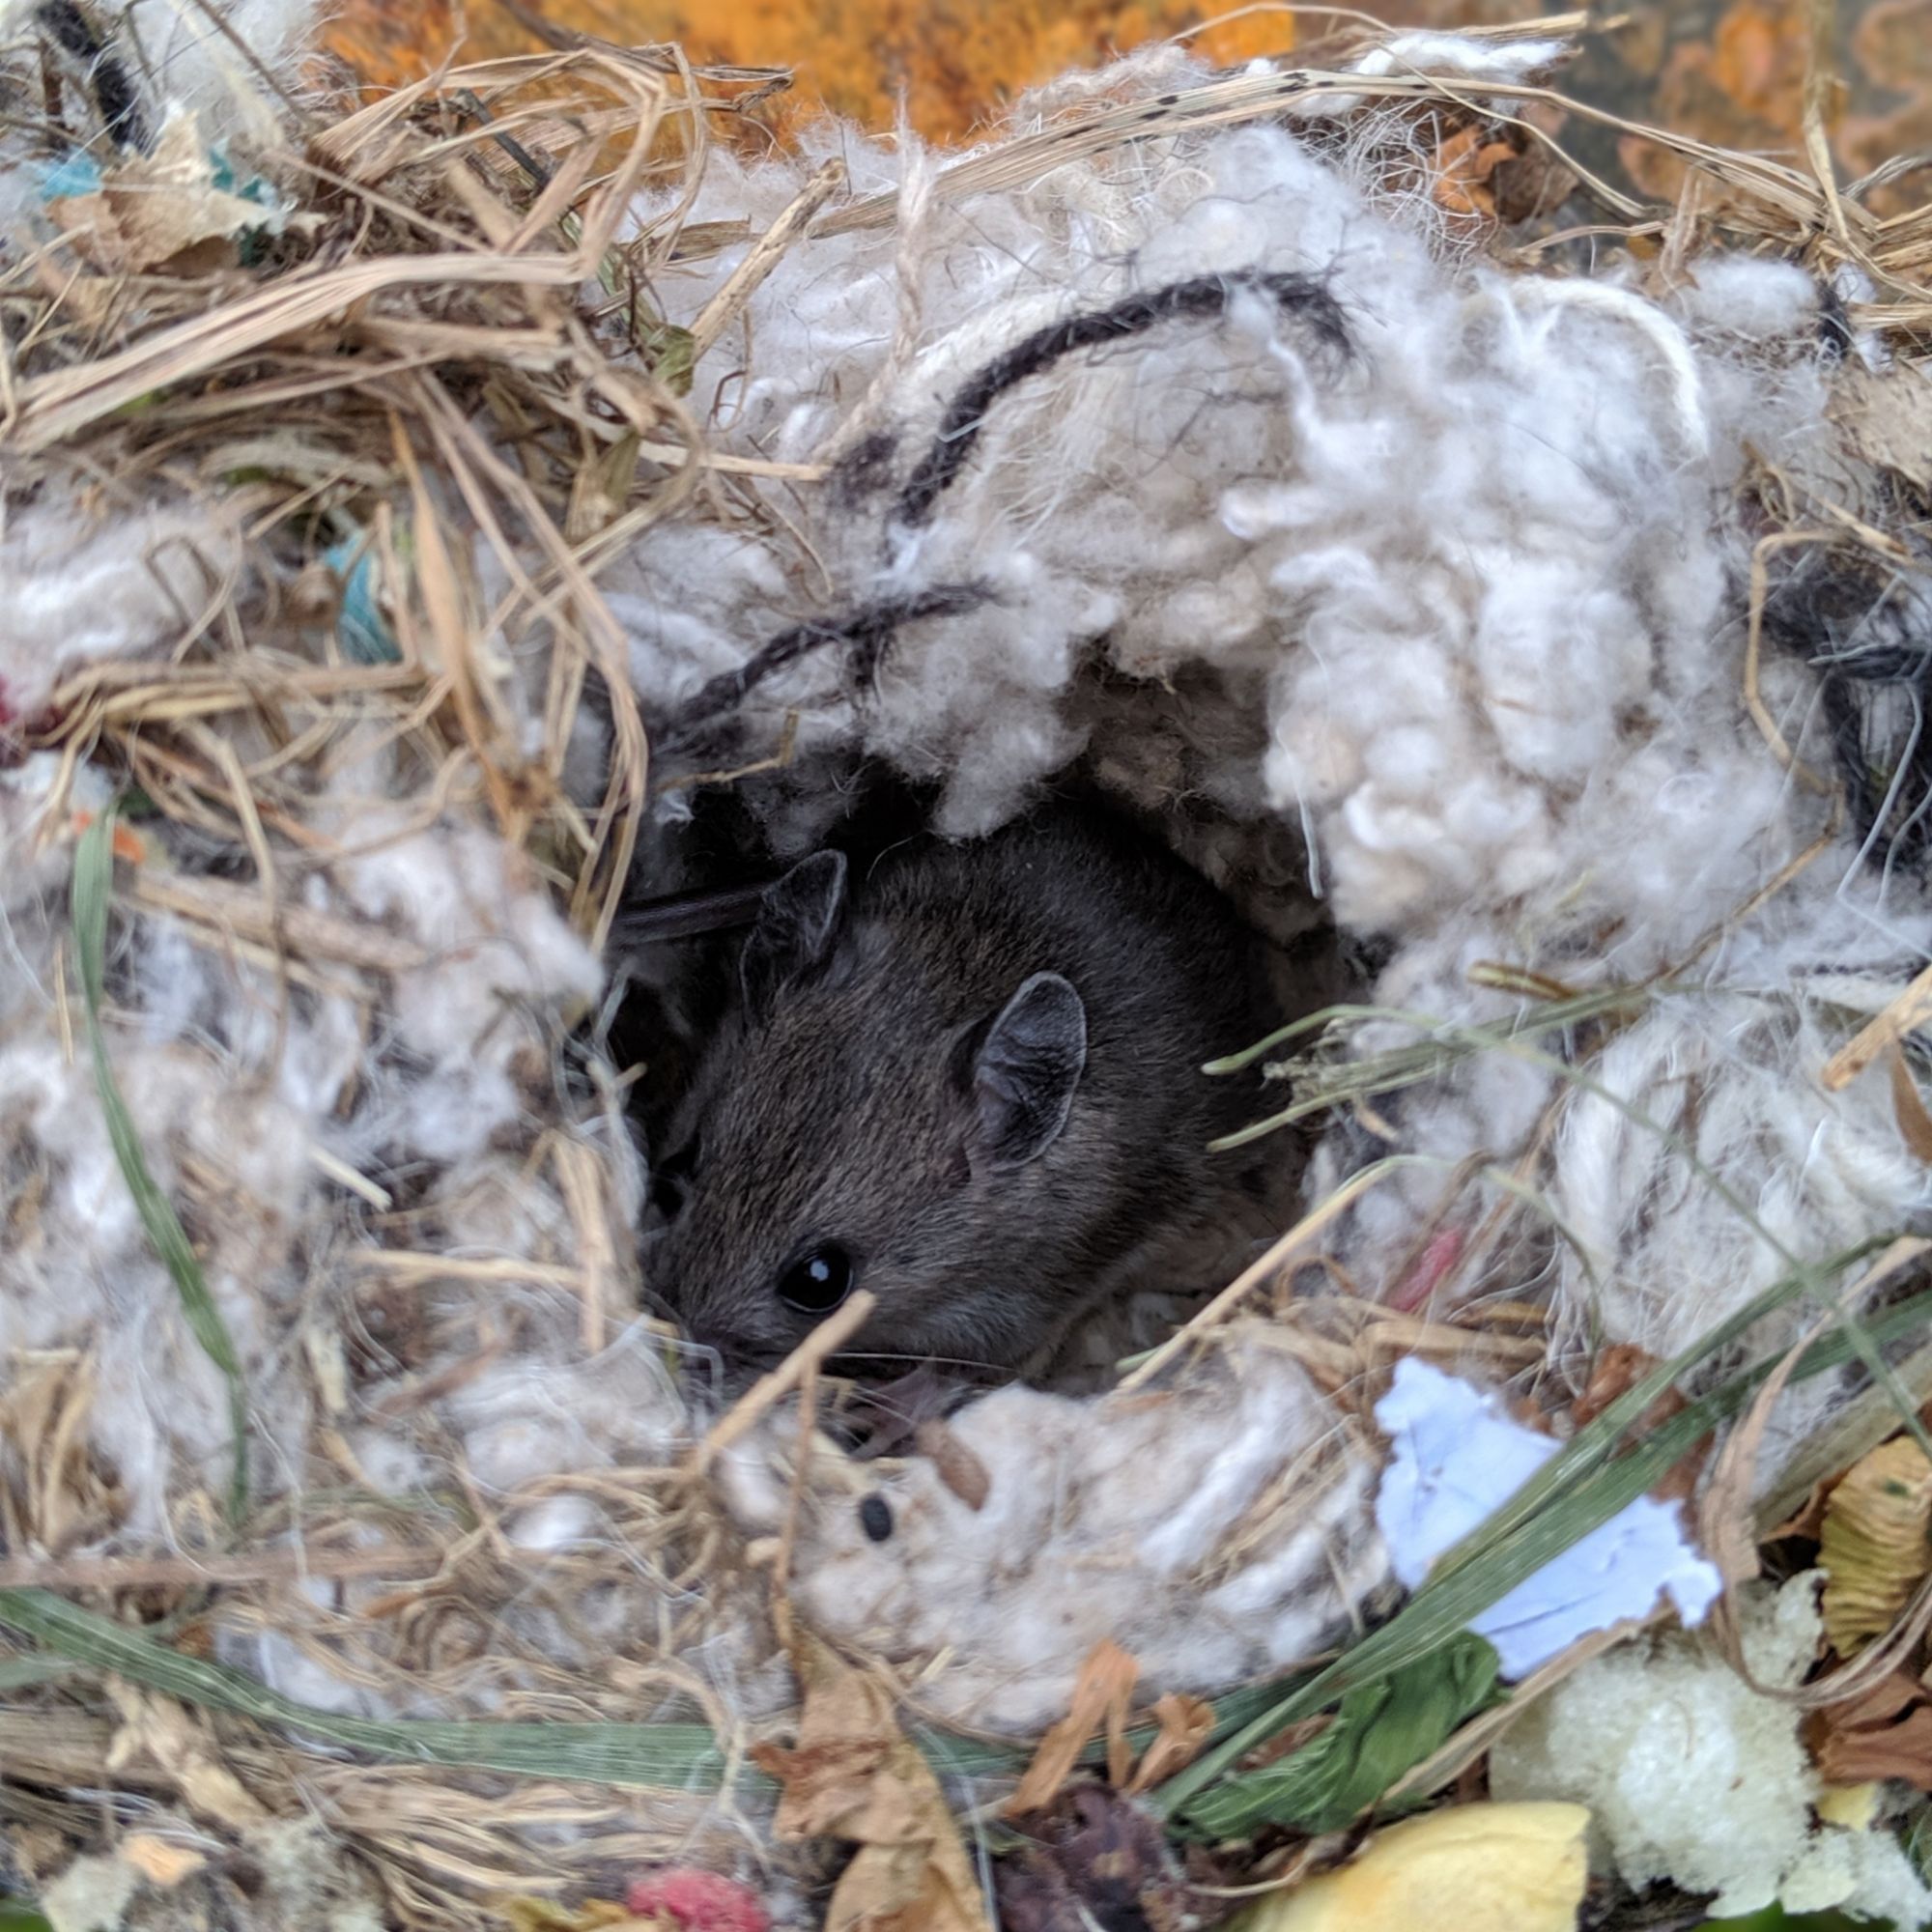 Mouse pup peeking out of the nest.